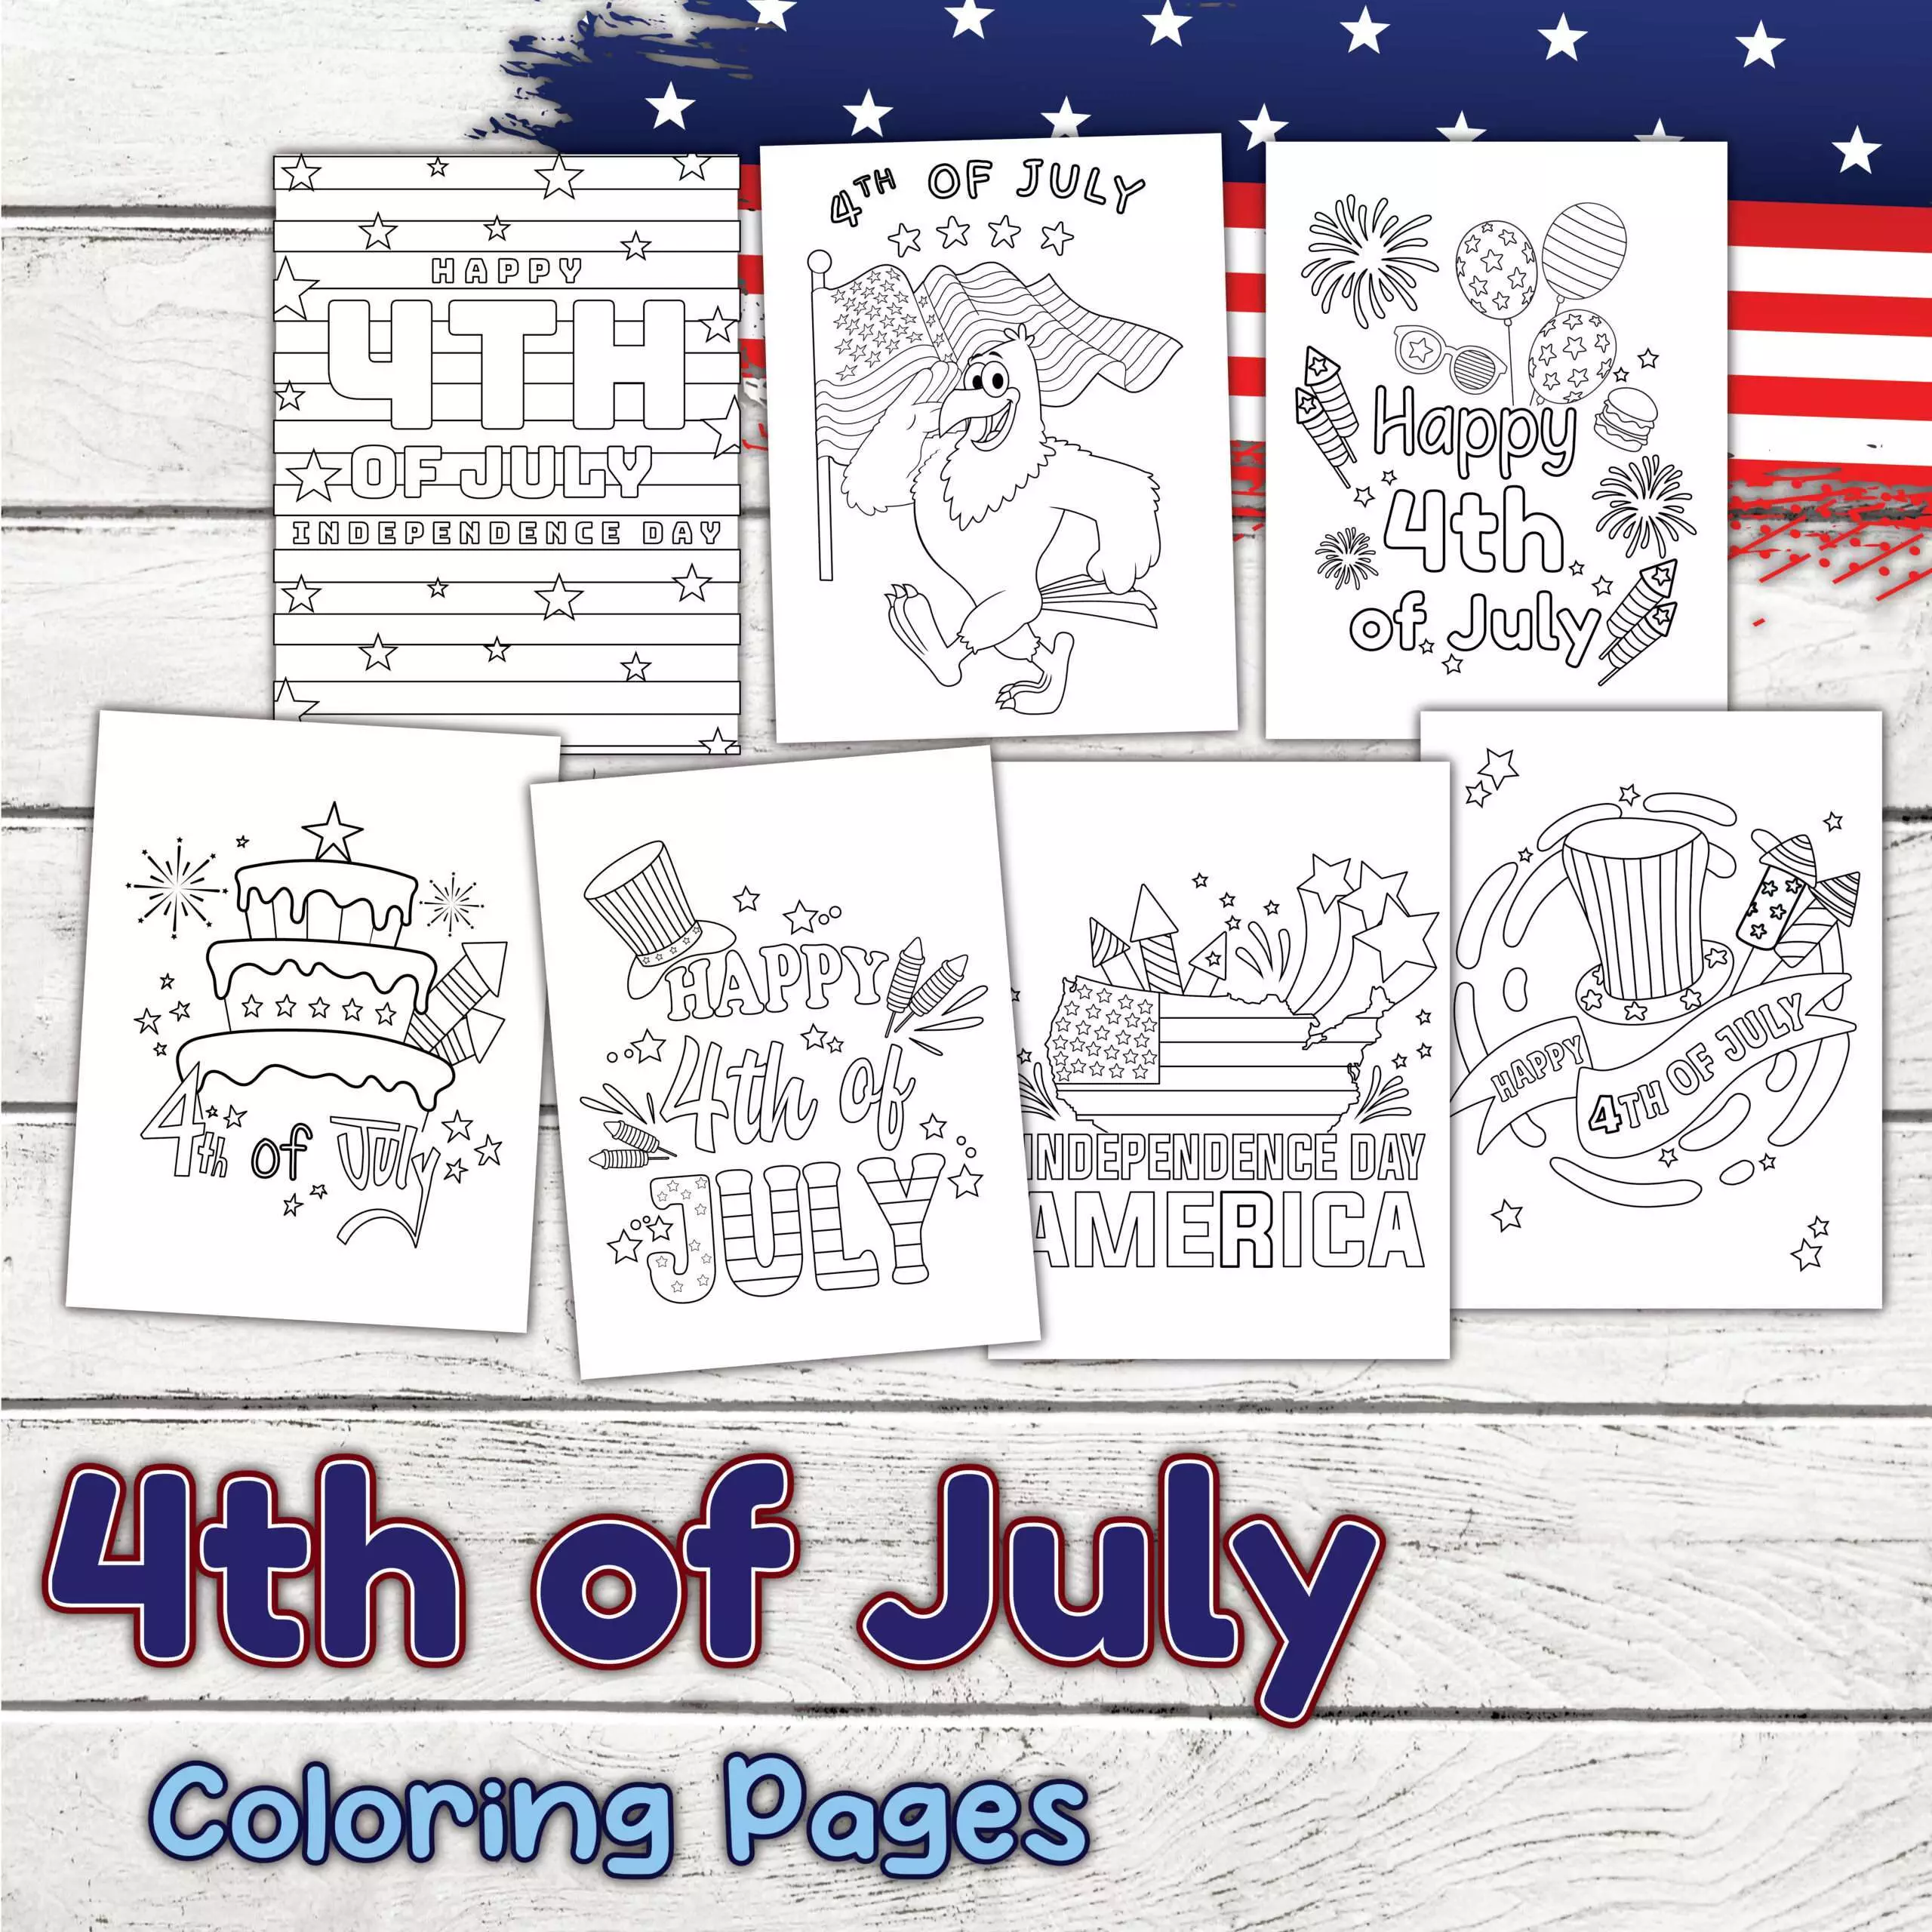 4th of July coloring pages mockup